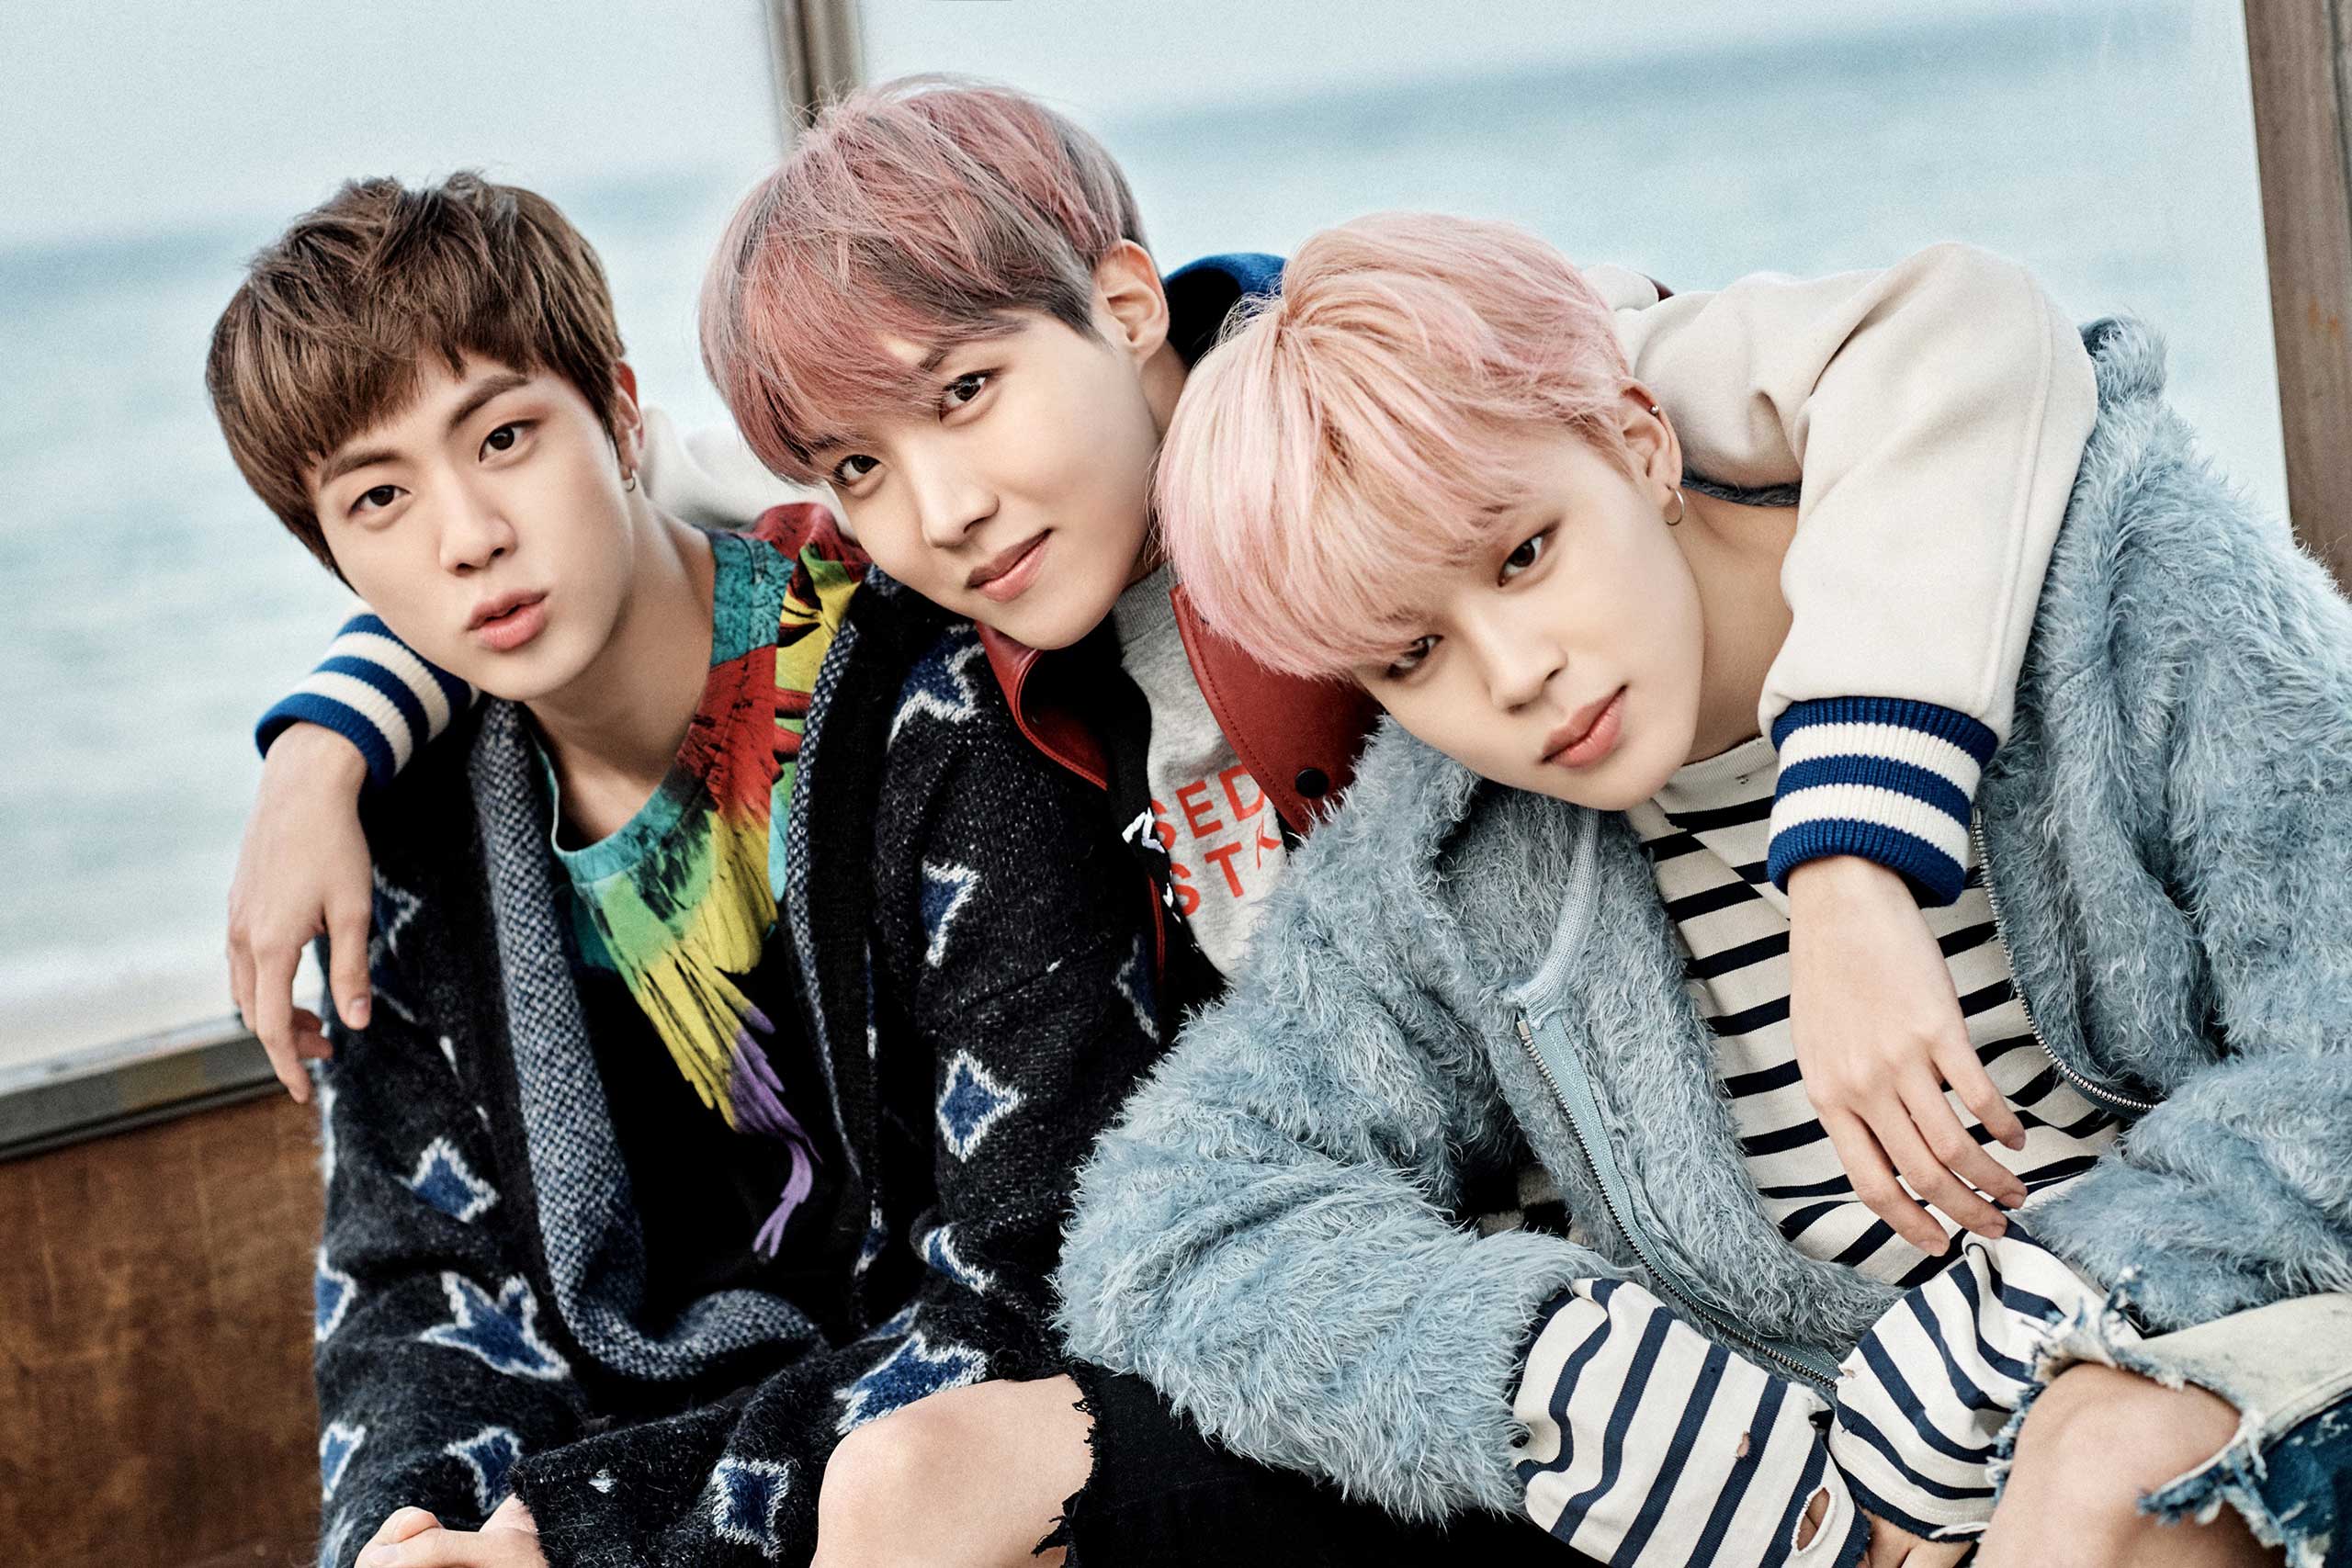 Bts In New Concept Photos For “you Never Walk Alone” - Jin Jimin And Jhope , HD Wallpaper & Backgrounds